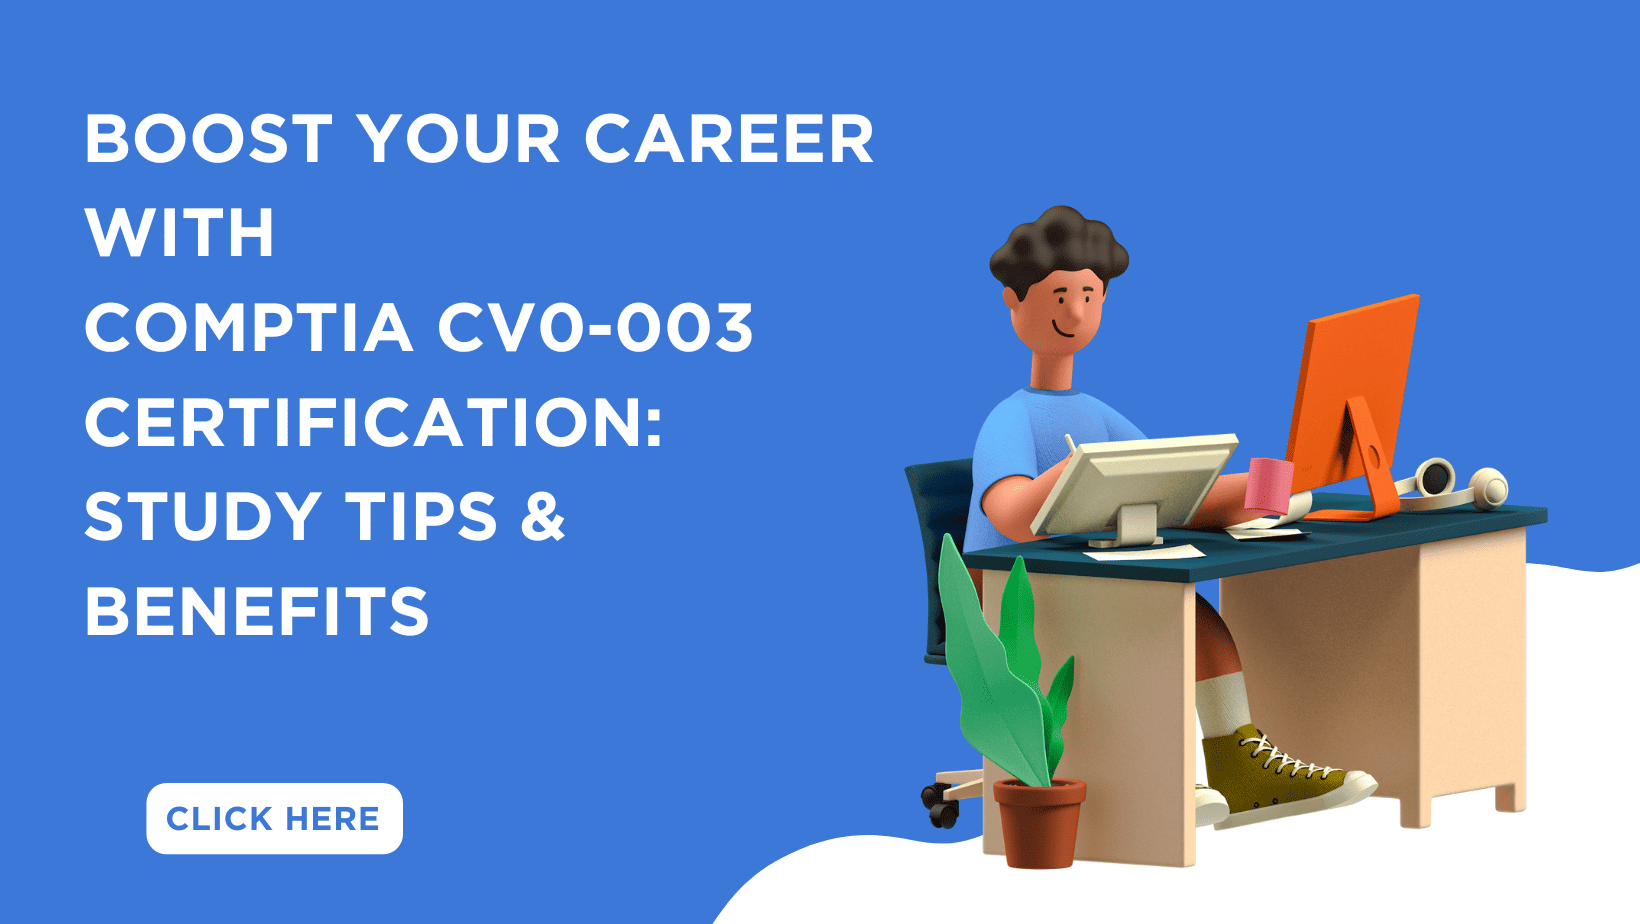 Ace the CompTIA CV0-003 Cloud Plus exam with expert study tips & practice tests. Boost your IT career with valuable certification benefits!